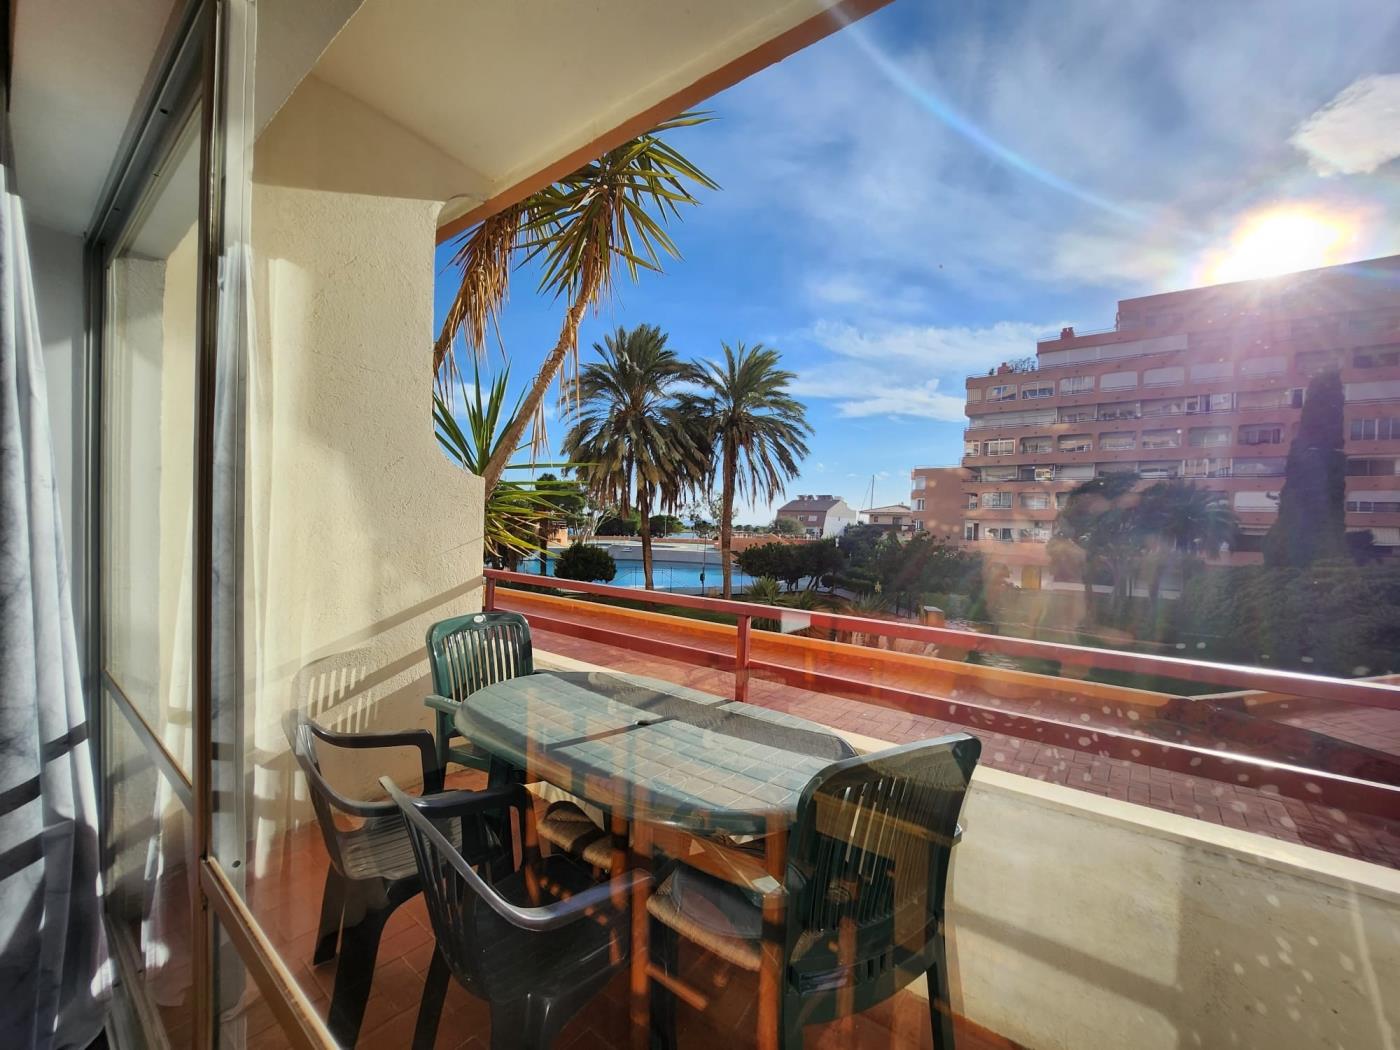 1 Bedroom apartment with pool views a0019 in ROSES